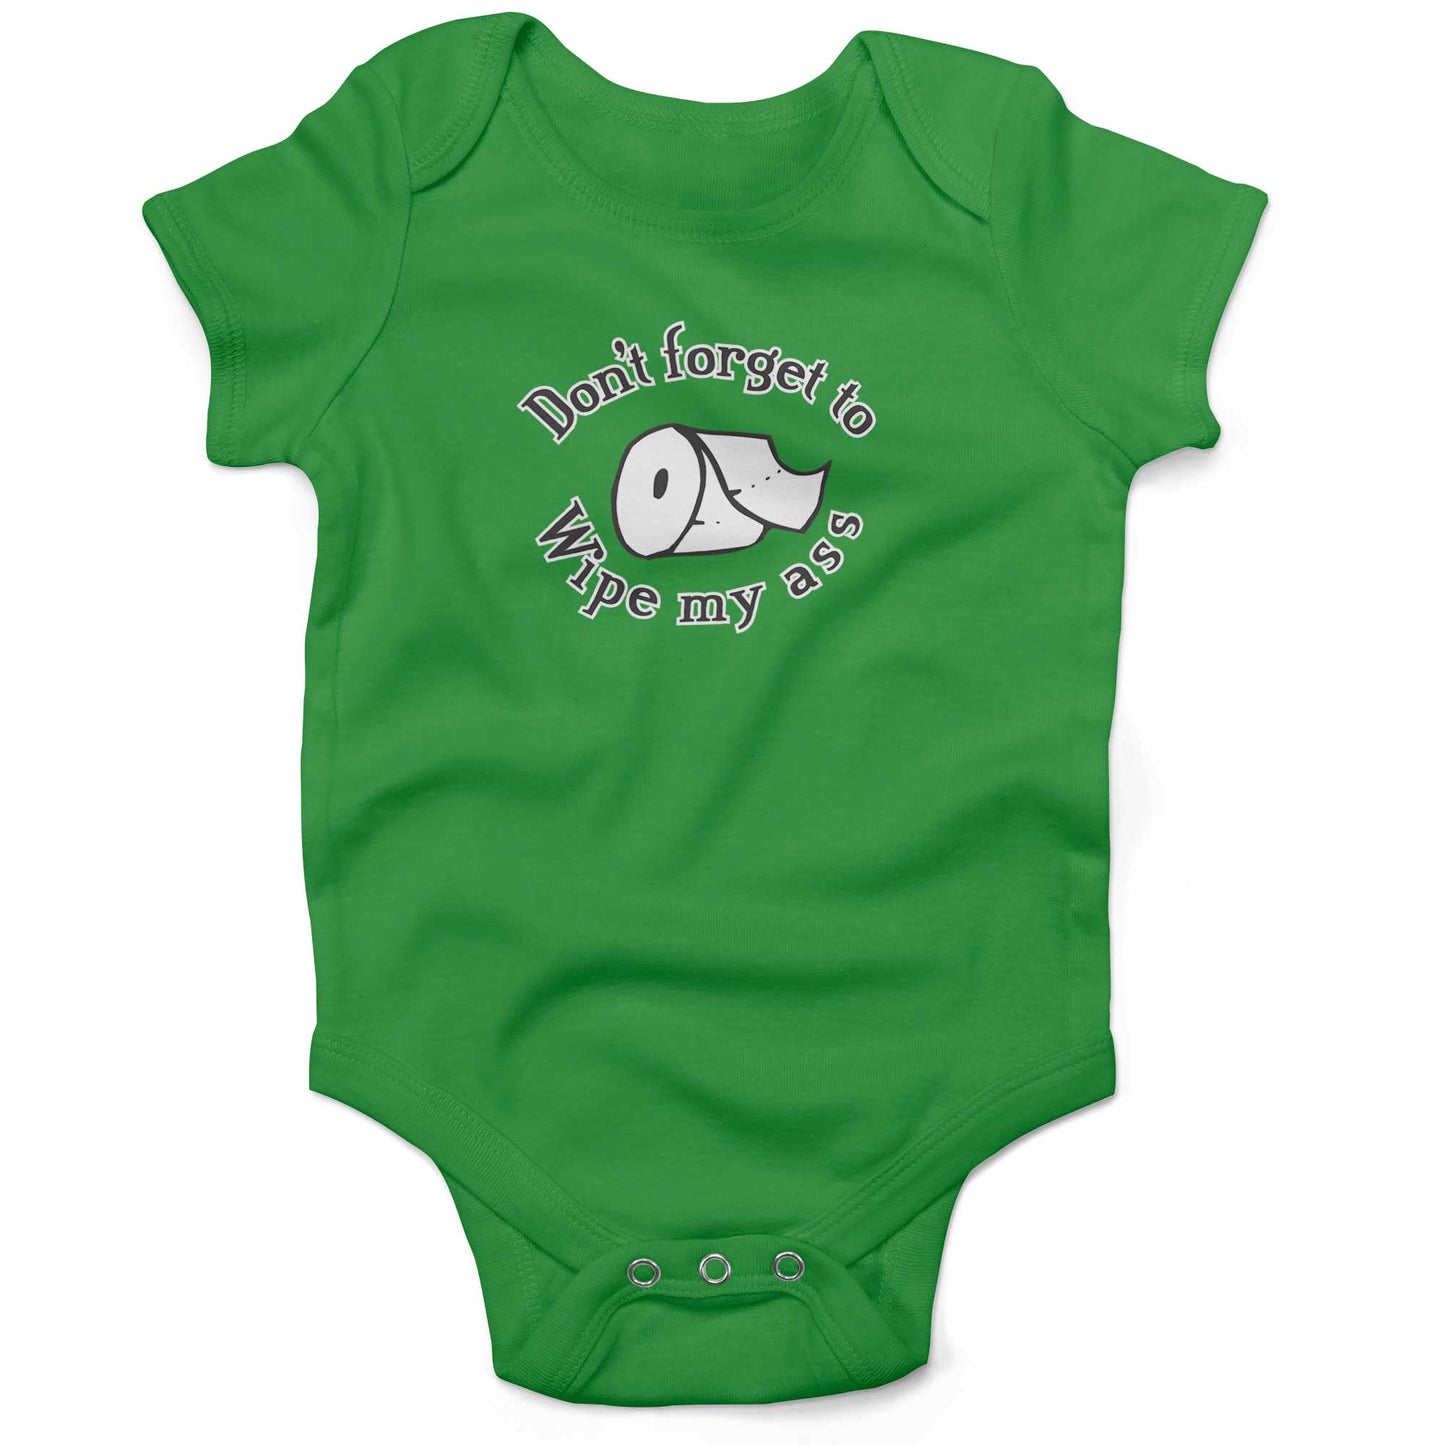 Don't Forget To Wipe My Ass Infant Bodysuit or Raglan Tee-Grass Green-3-6 months